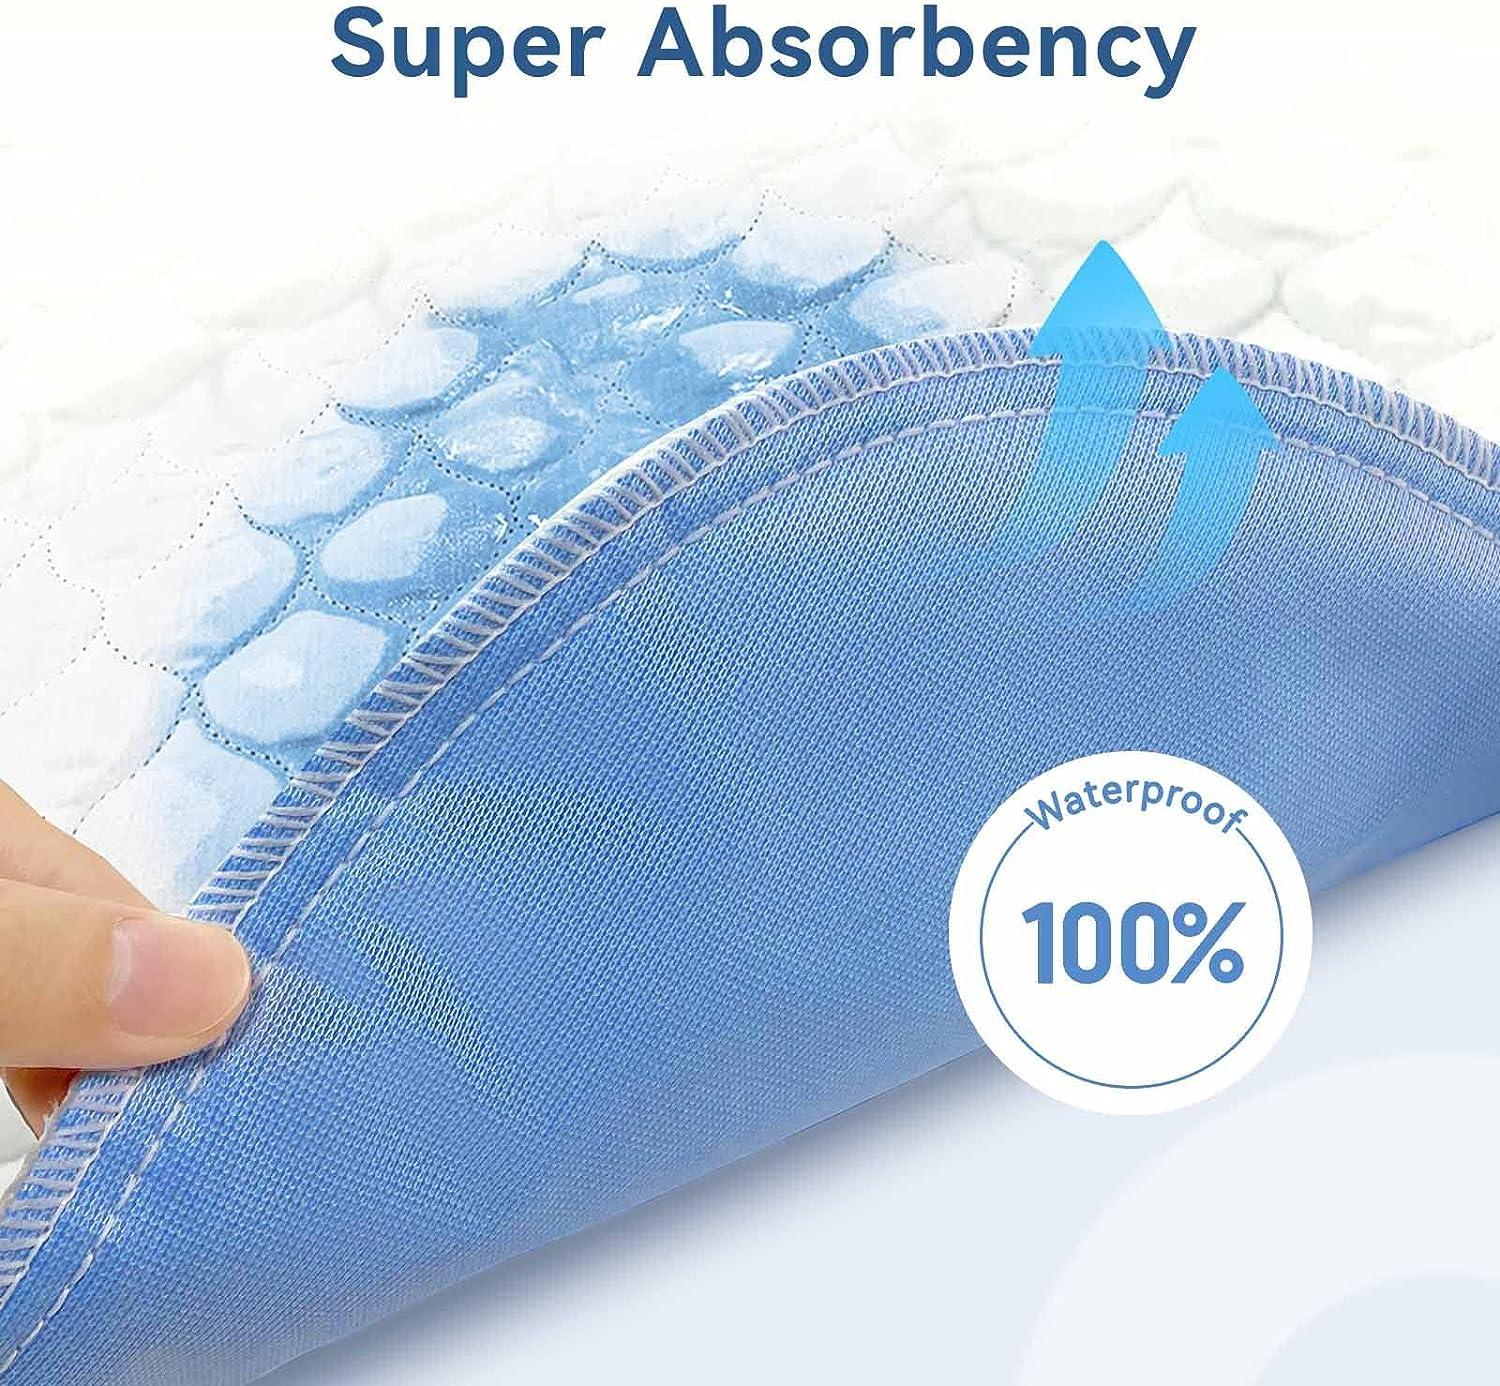  Conkote Heavy Absorbency Bed Pads, 34X36 (4 Pack